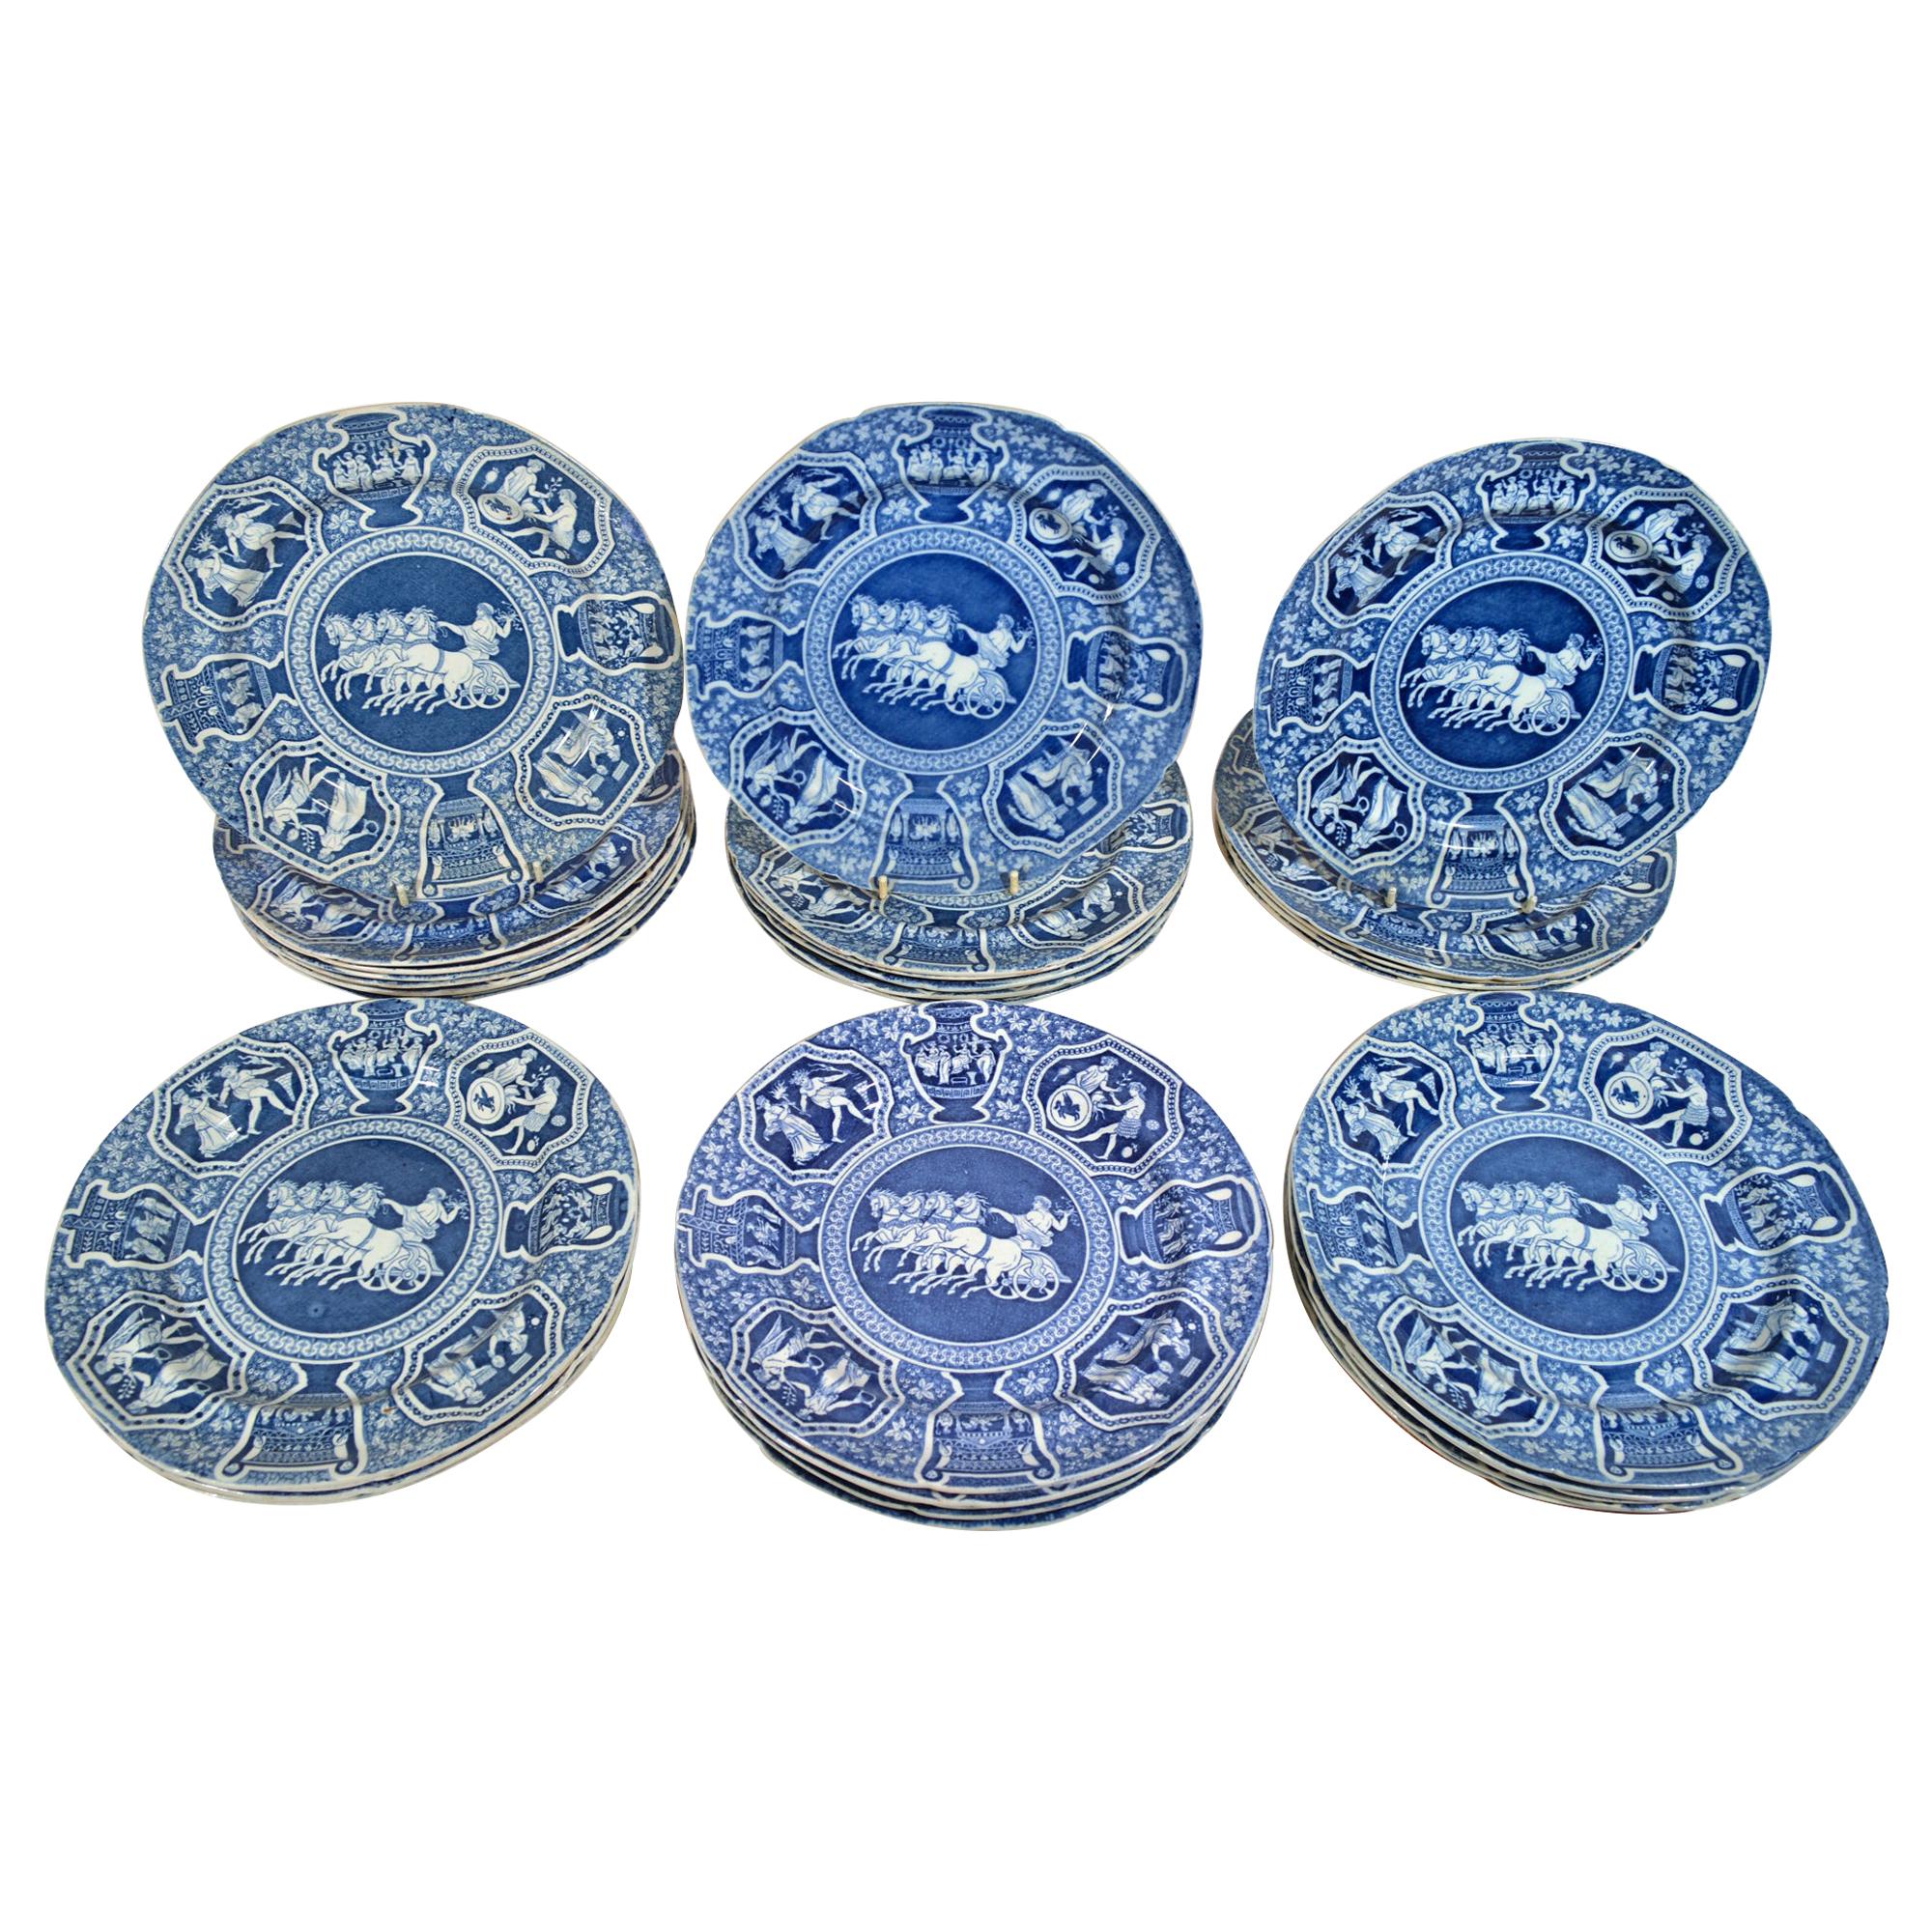 Spode Pottery Neo-Classical Greek Pattern Blue Set of Dinner Plates-33 Plates For Sale